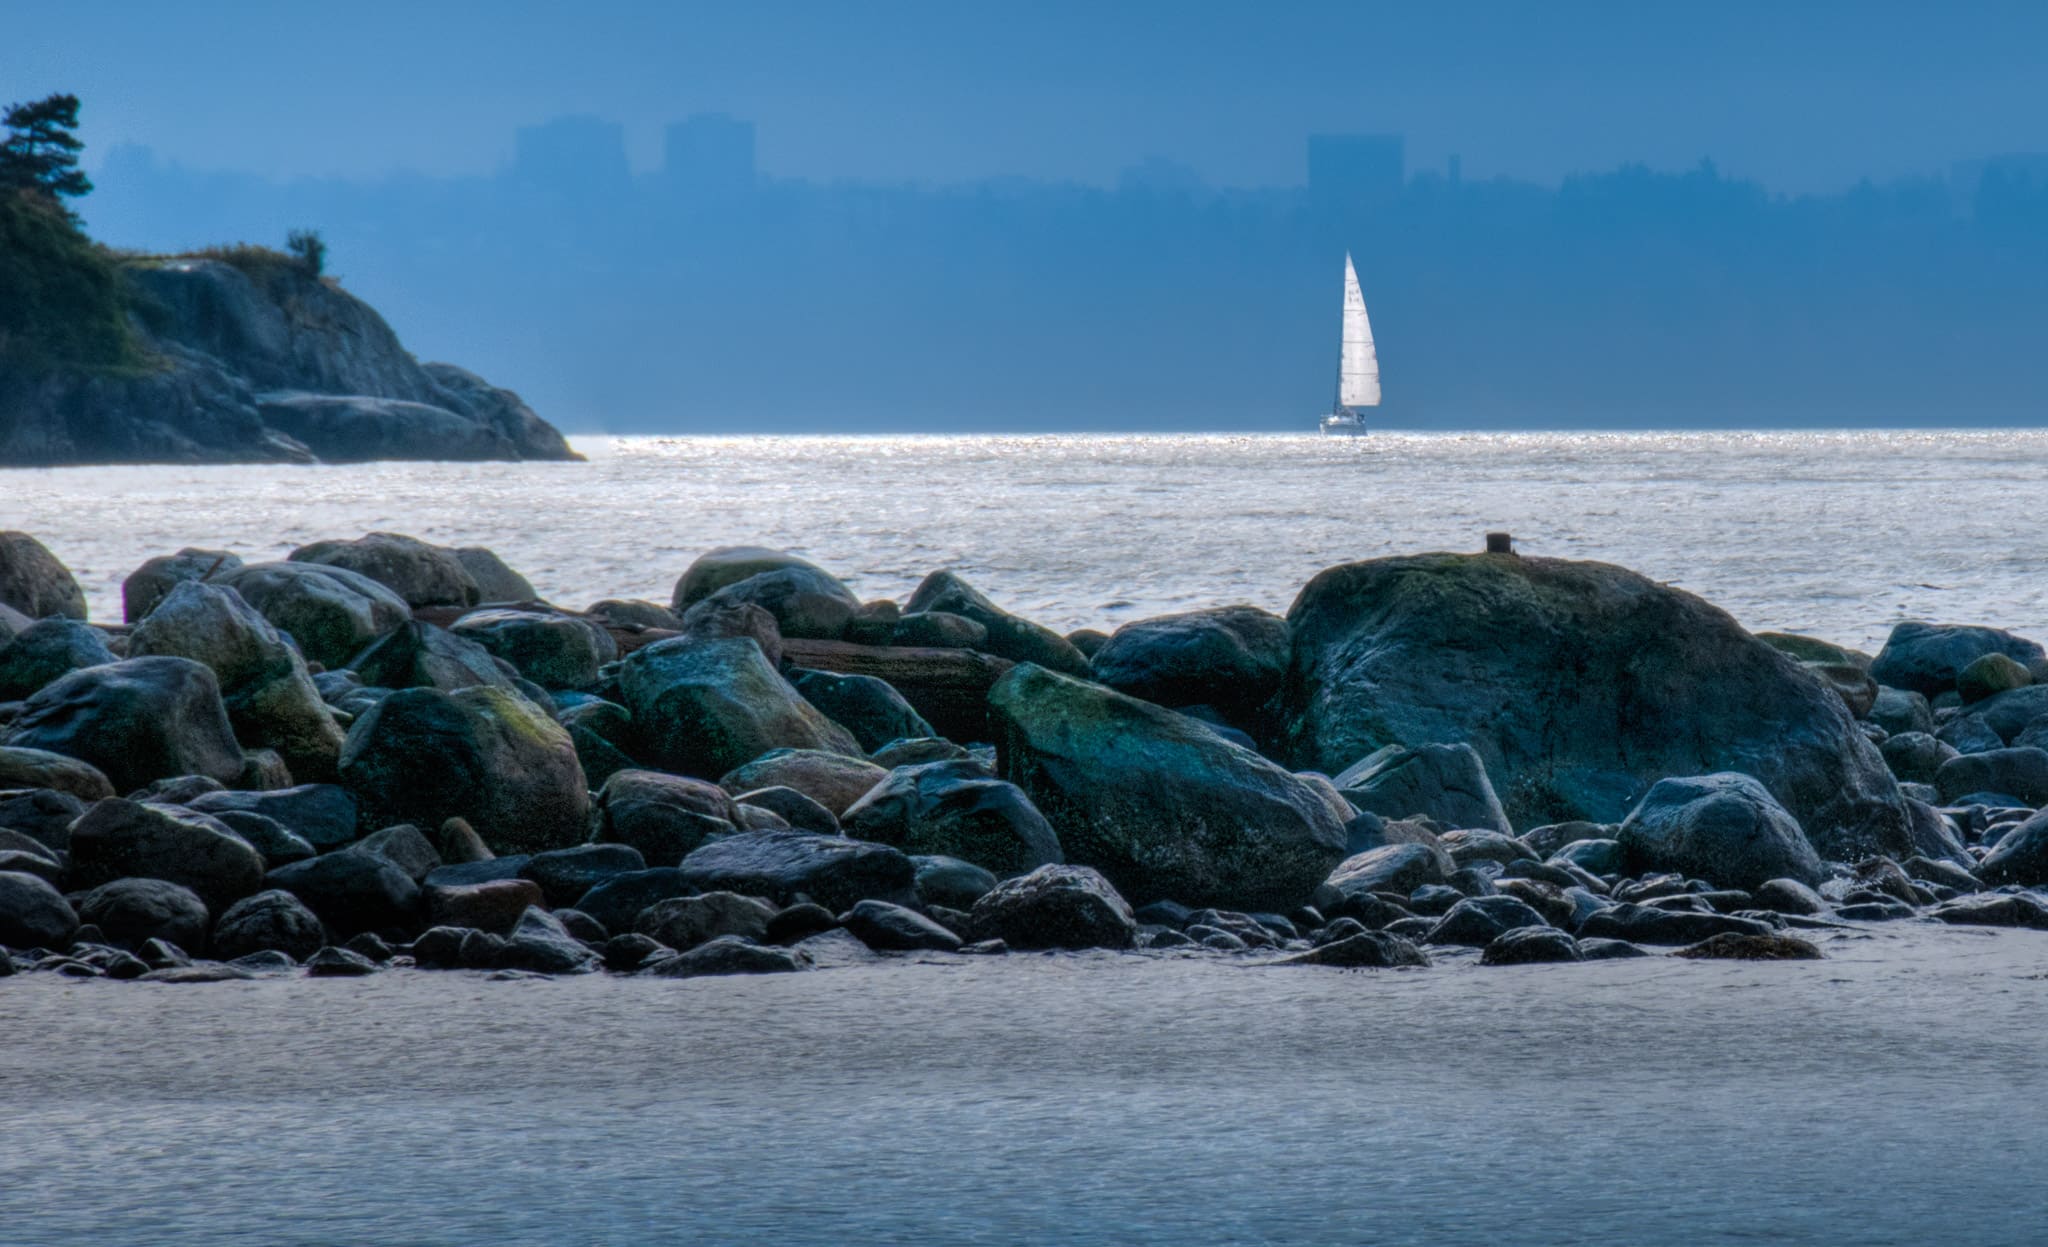 A view at sunset along the shore of Whytecliff Park with Bowen Island, in West Vancouver, British Columbia.